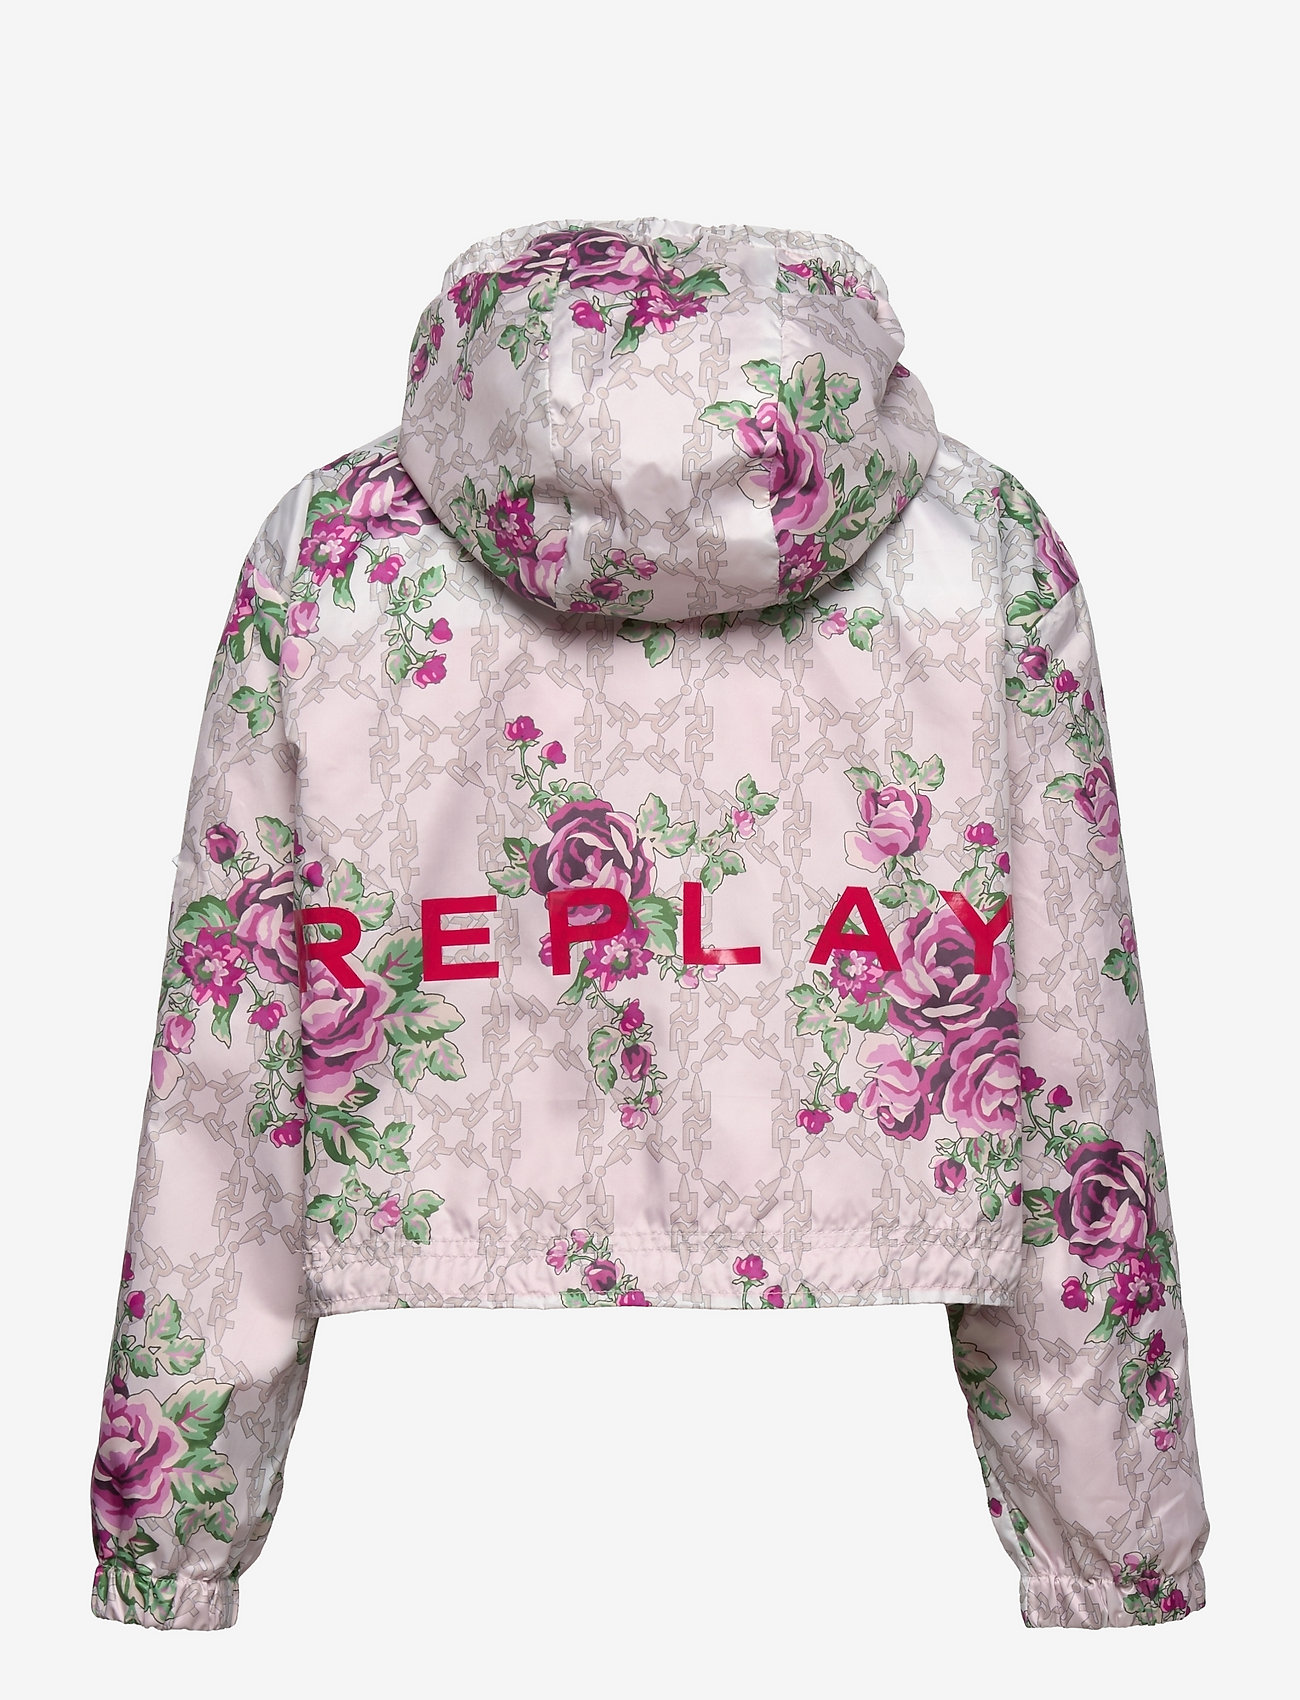 Replay - Jacket - spring jackets - white with print blue - 1